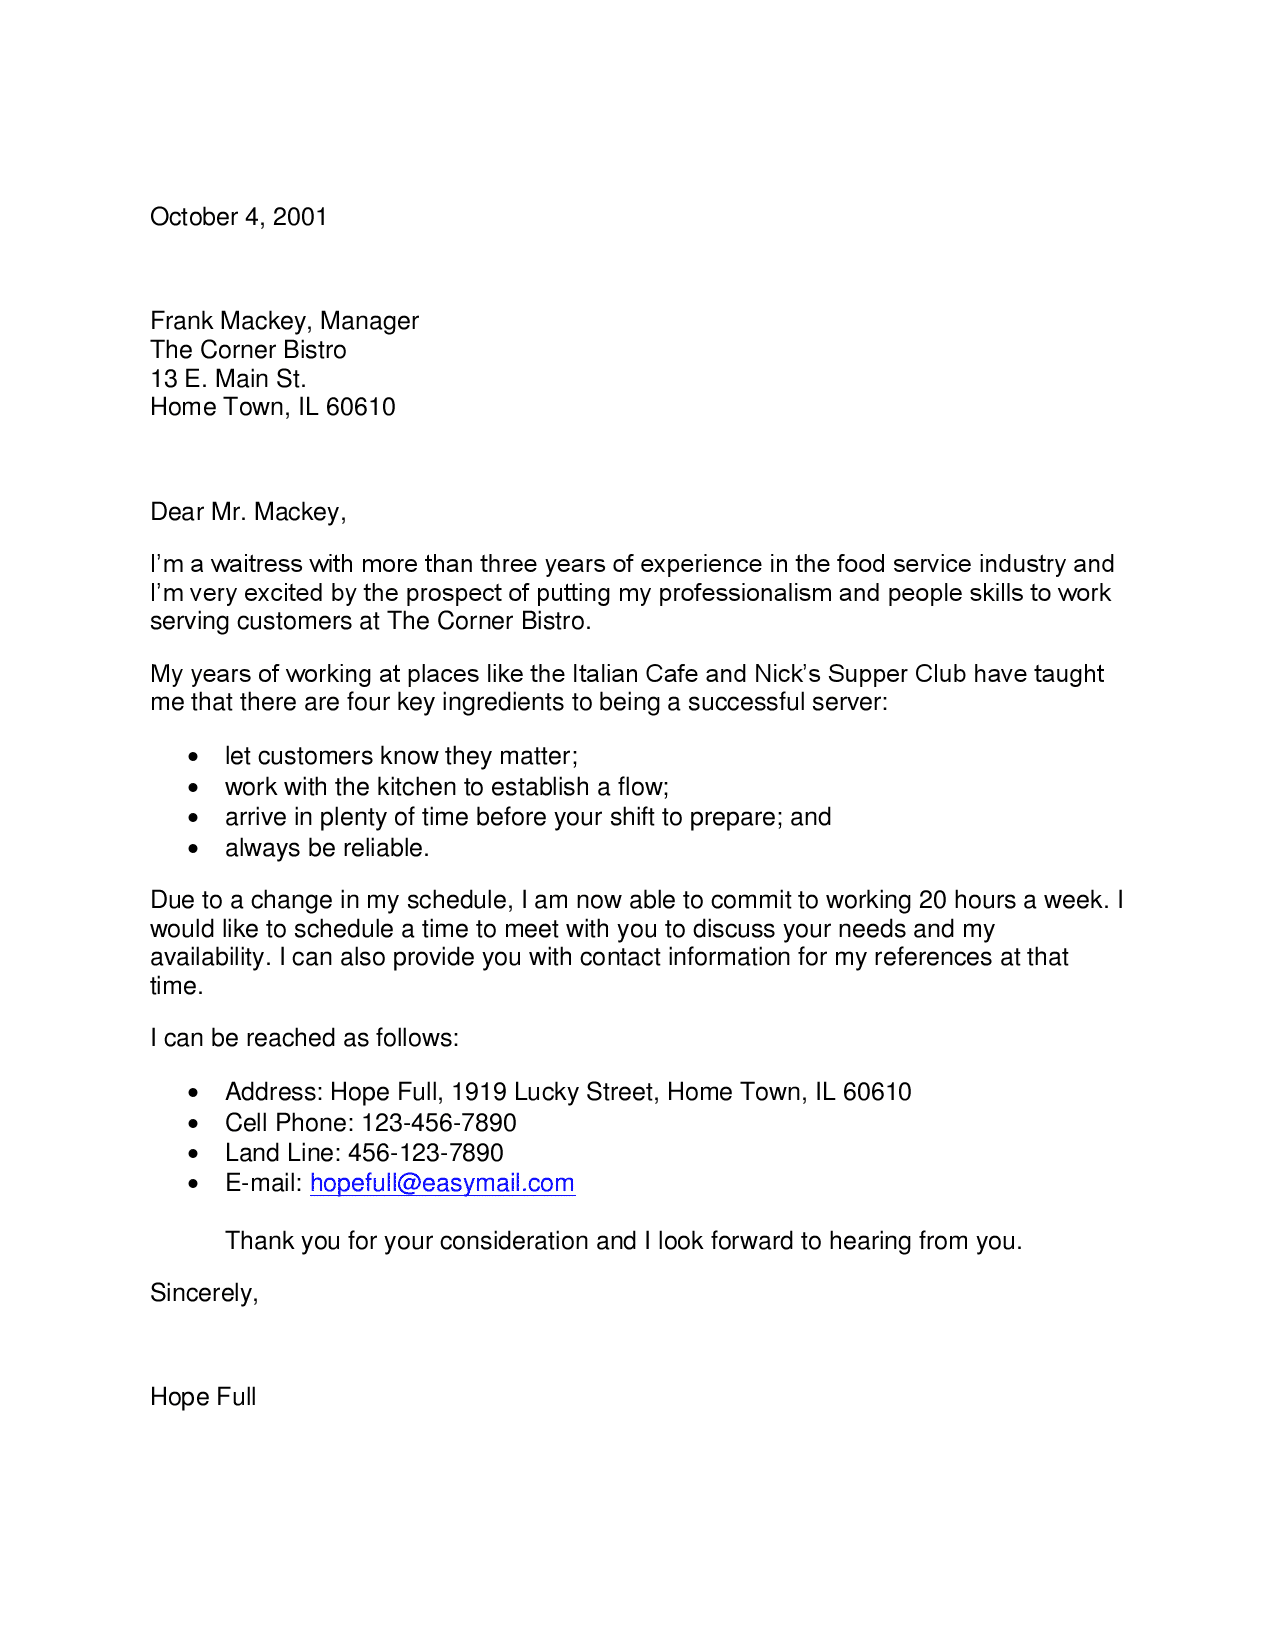 Account payable cover letter templates